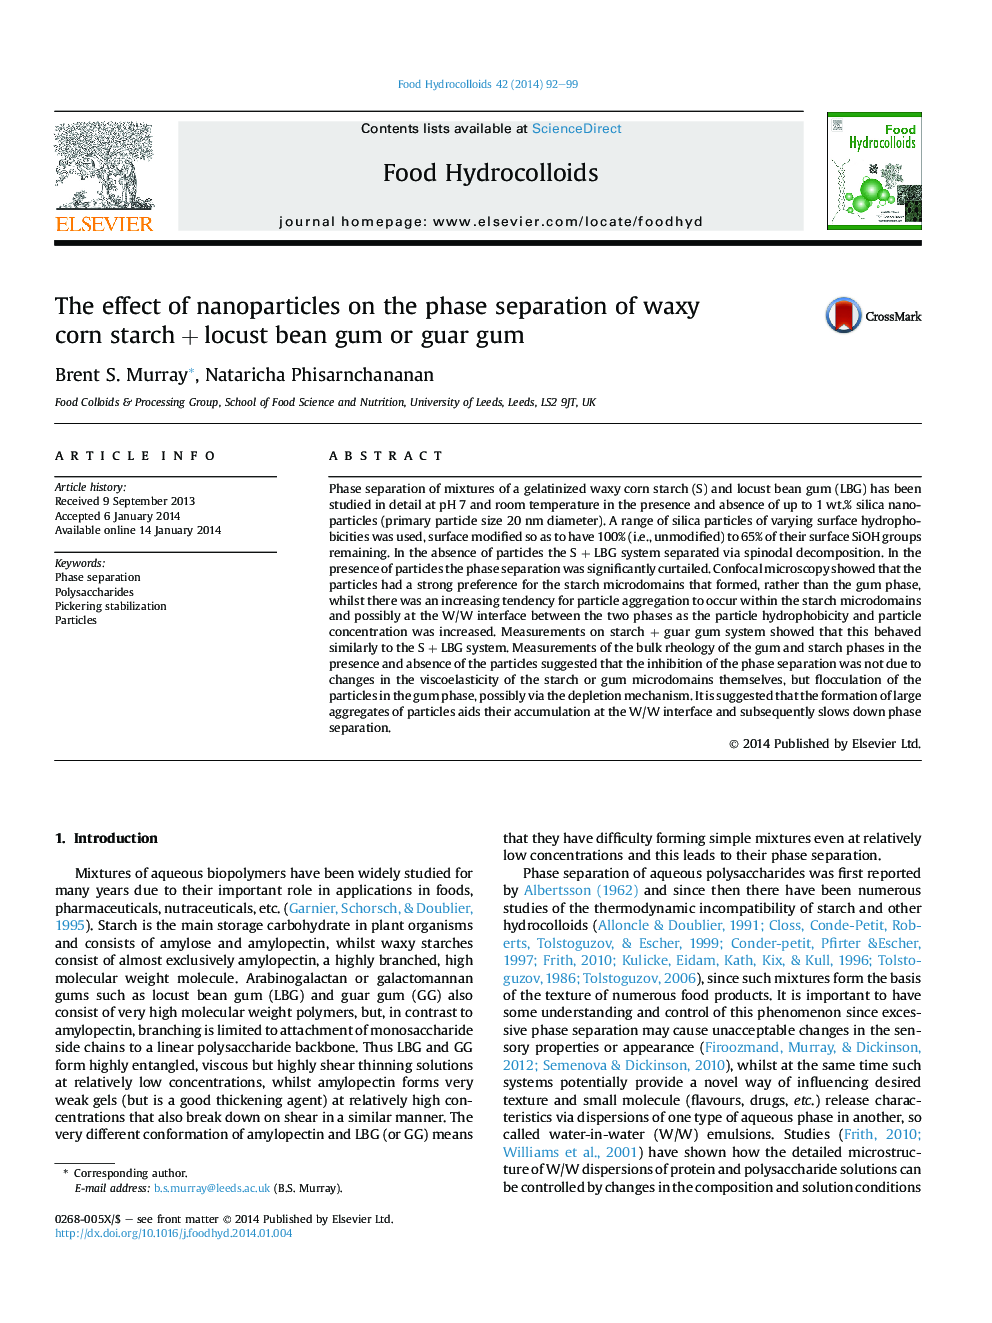 The effect of nanoparticles on the phase separation of waxy corn starch + locust bean gum or guar gum